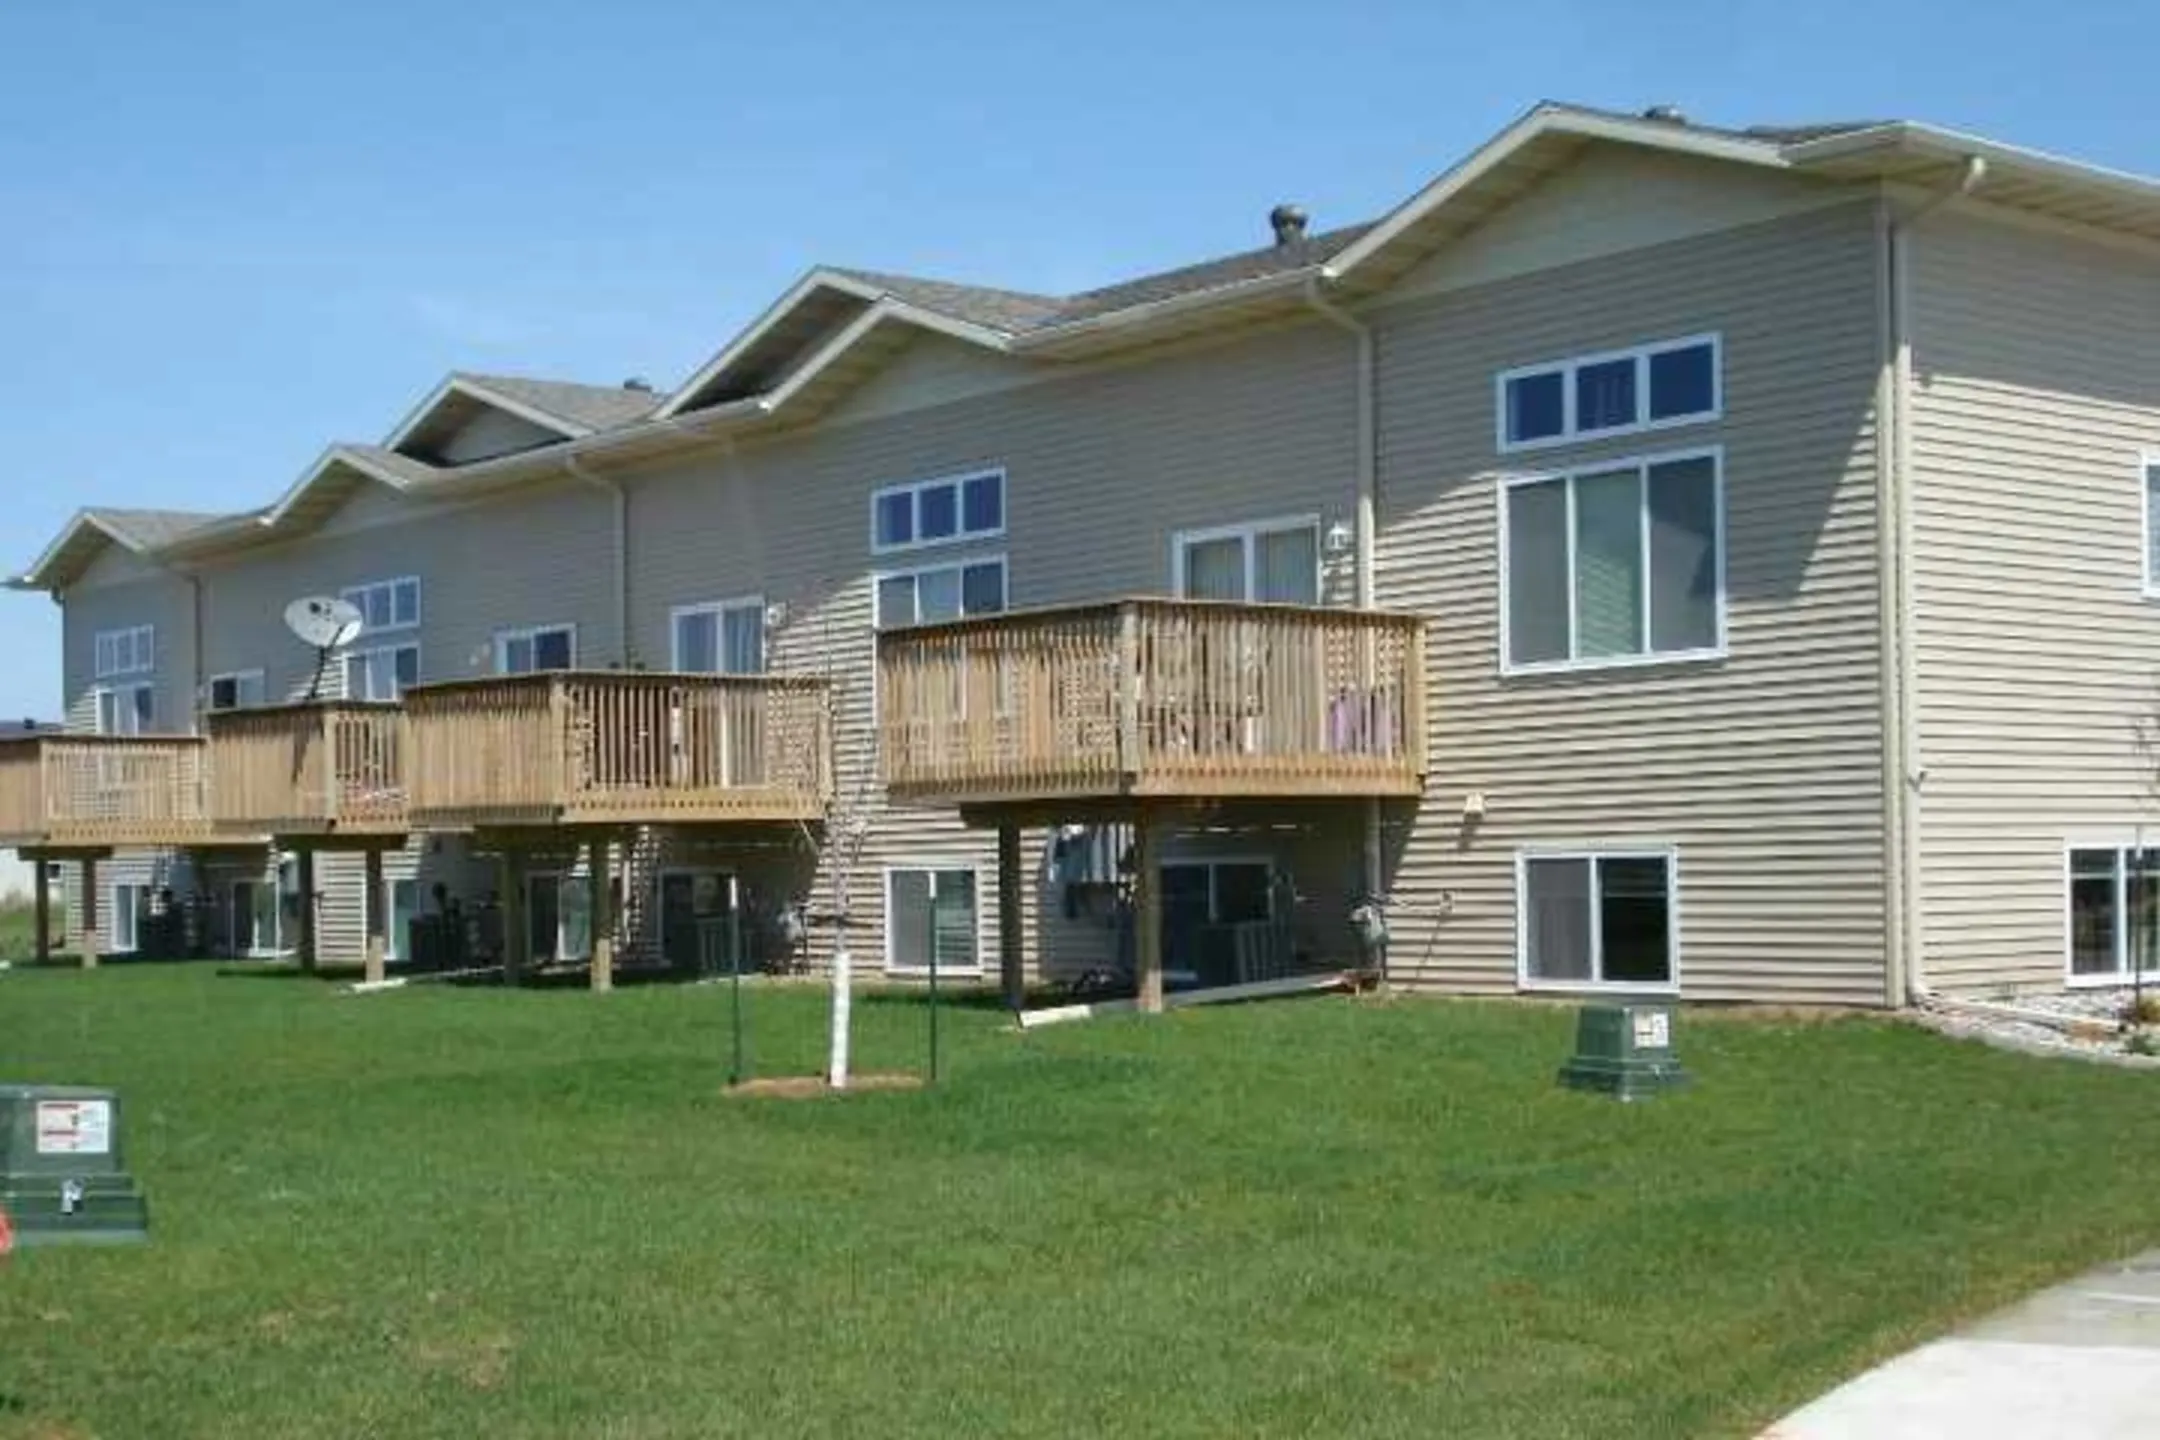 Building - Town Square Townhomes - Fargo, ND